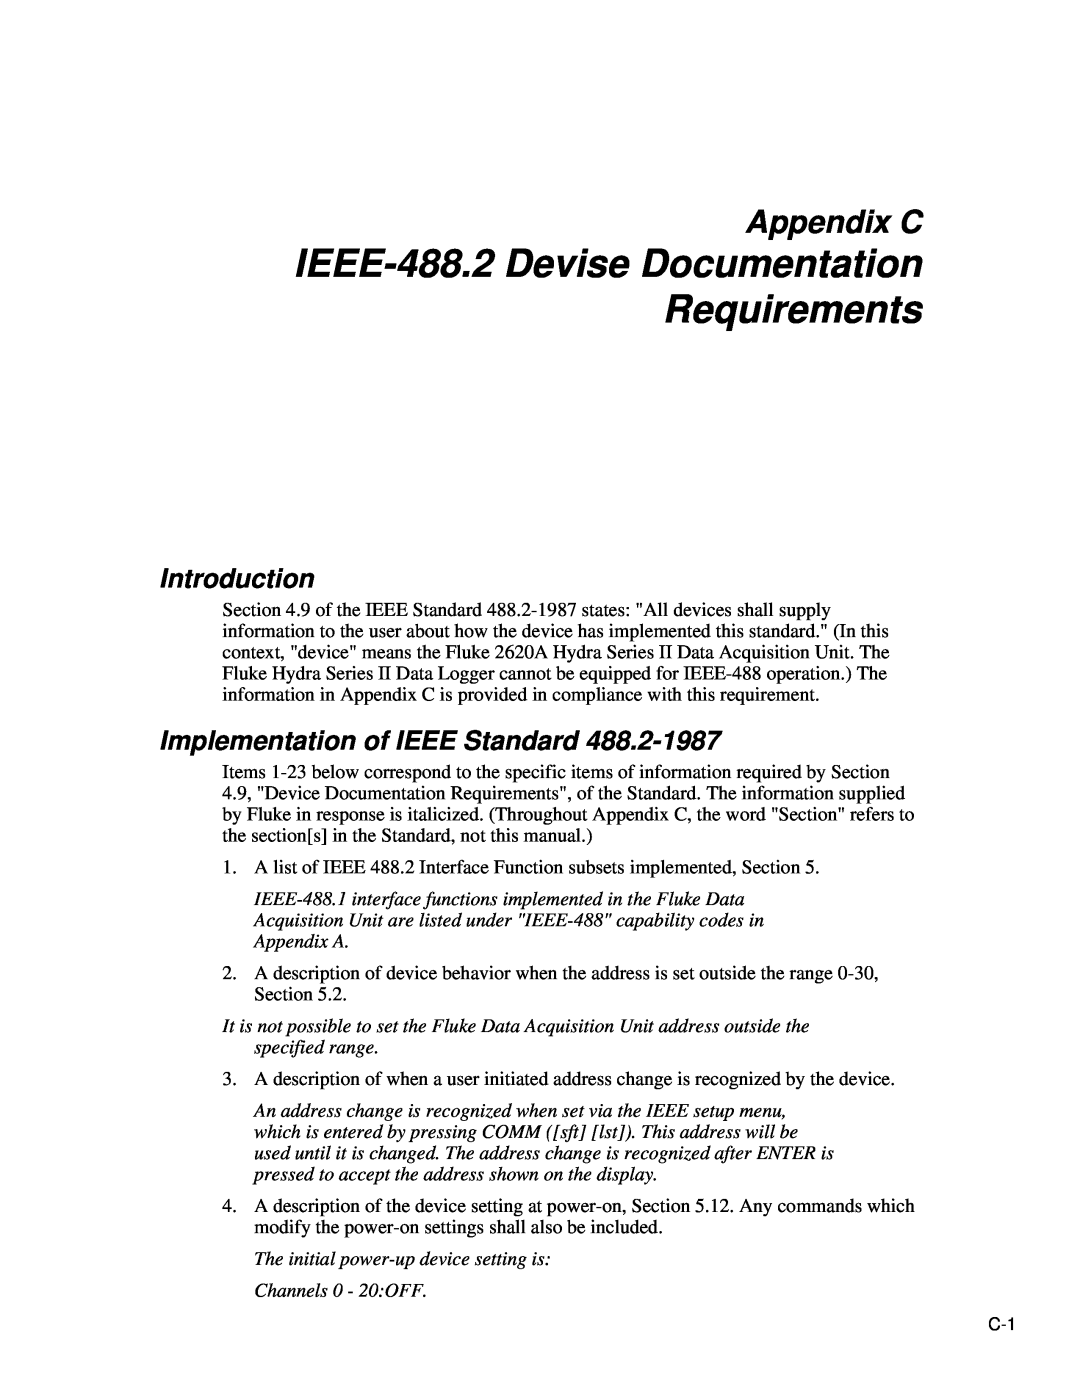 Fluke 2620A, 2625A IEEE-488.2 Devise Documentation Requirements, Appendix C, Implementation of IEEE Standard, Introduction 